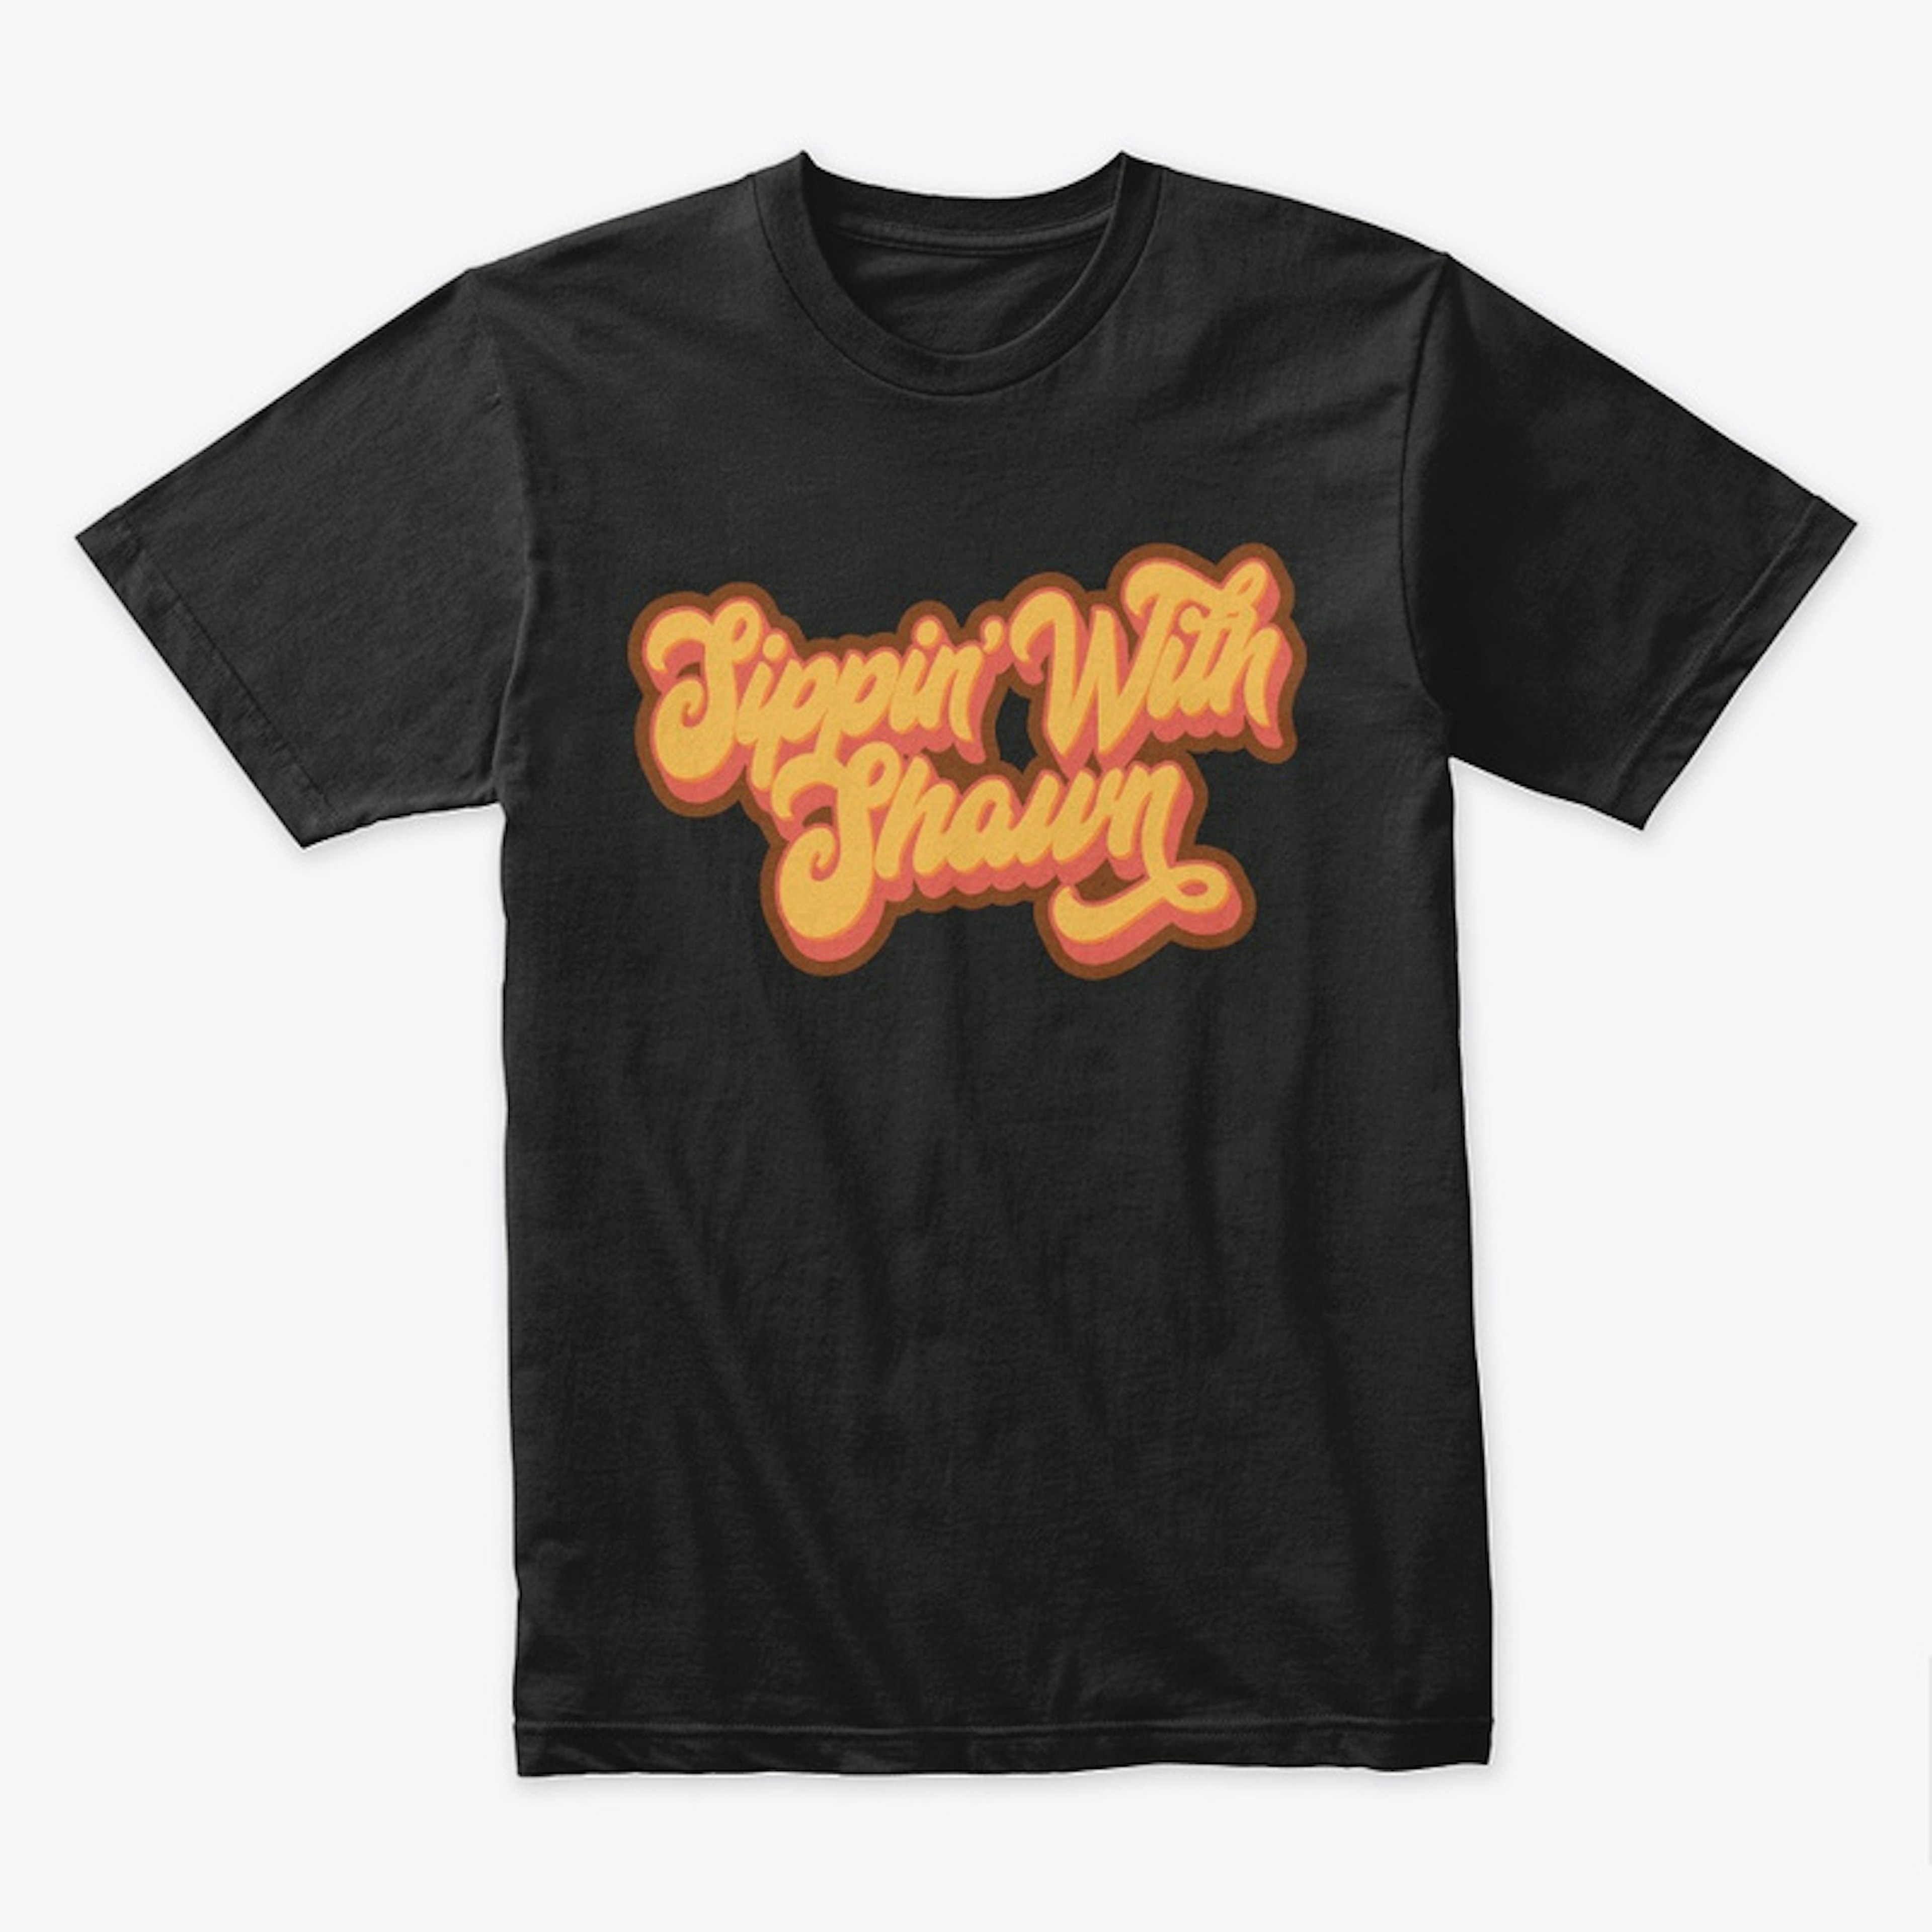 Sippin' With Shawn Retro Men's Apparel